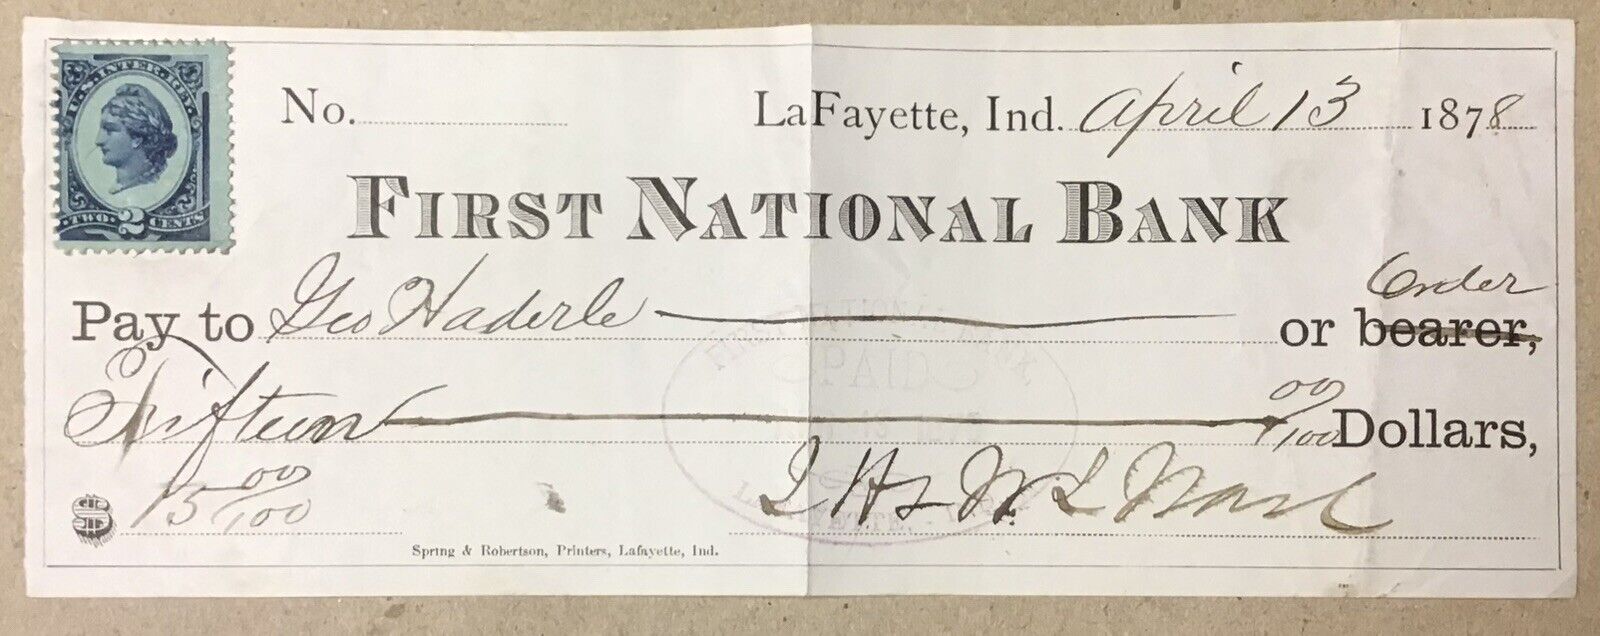 1878 Vintage First National Bank Check Lafayette Indiana USA 2c Revenue Stamp